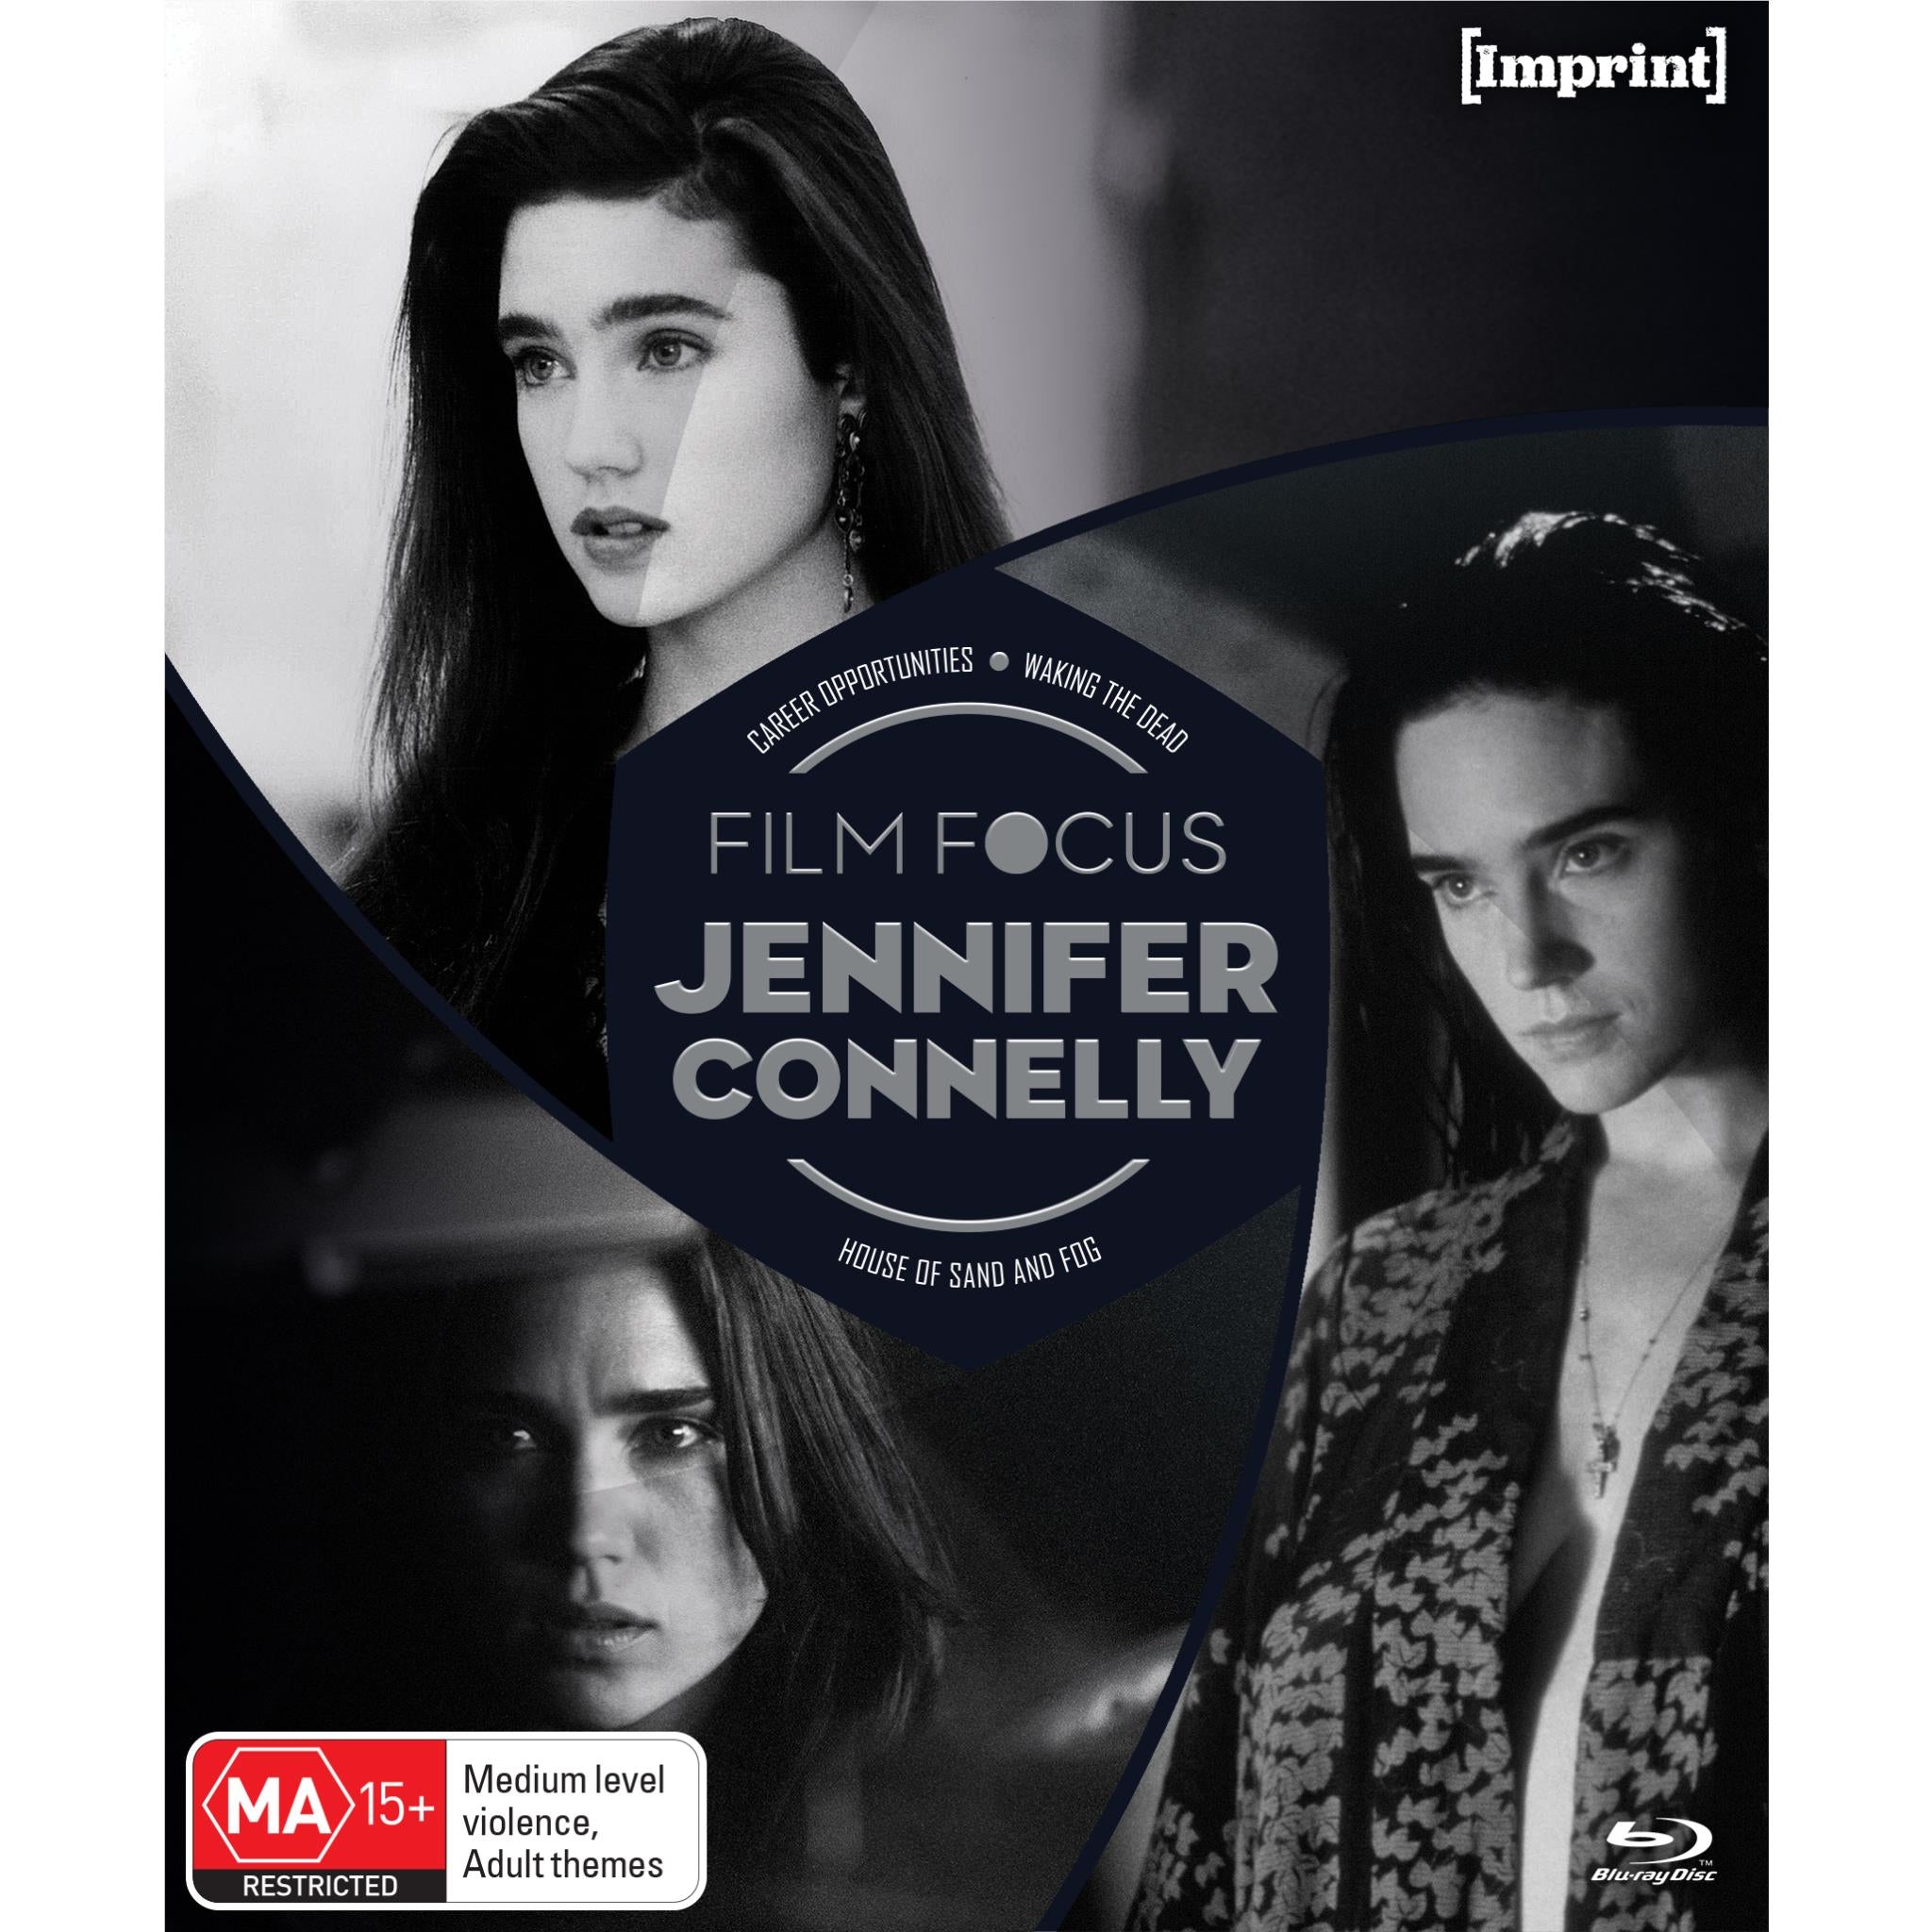 film focus: jennifer connelly (imprint collection special edition)